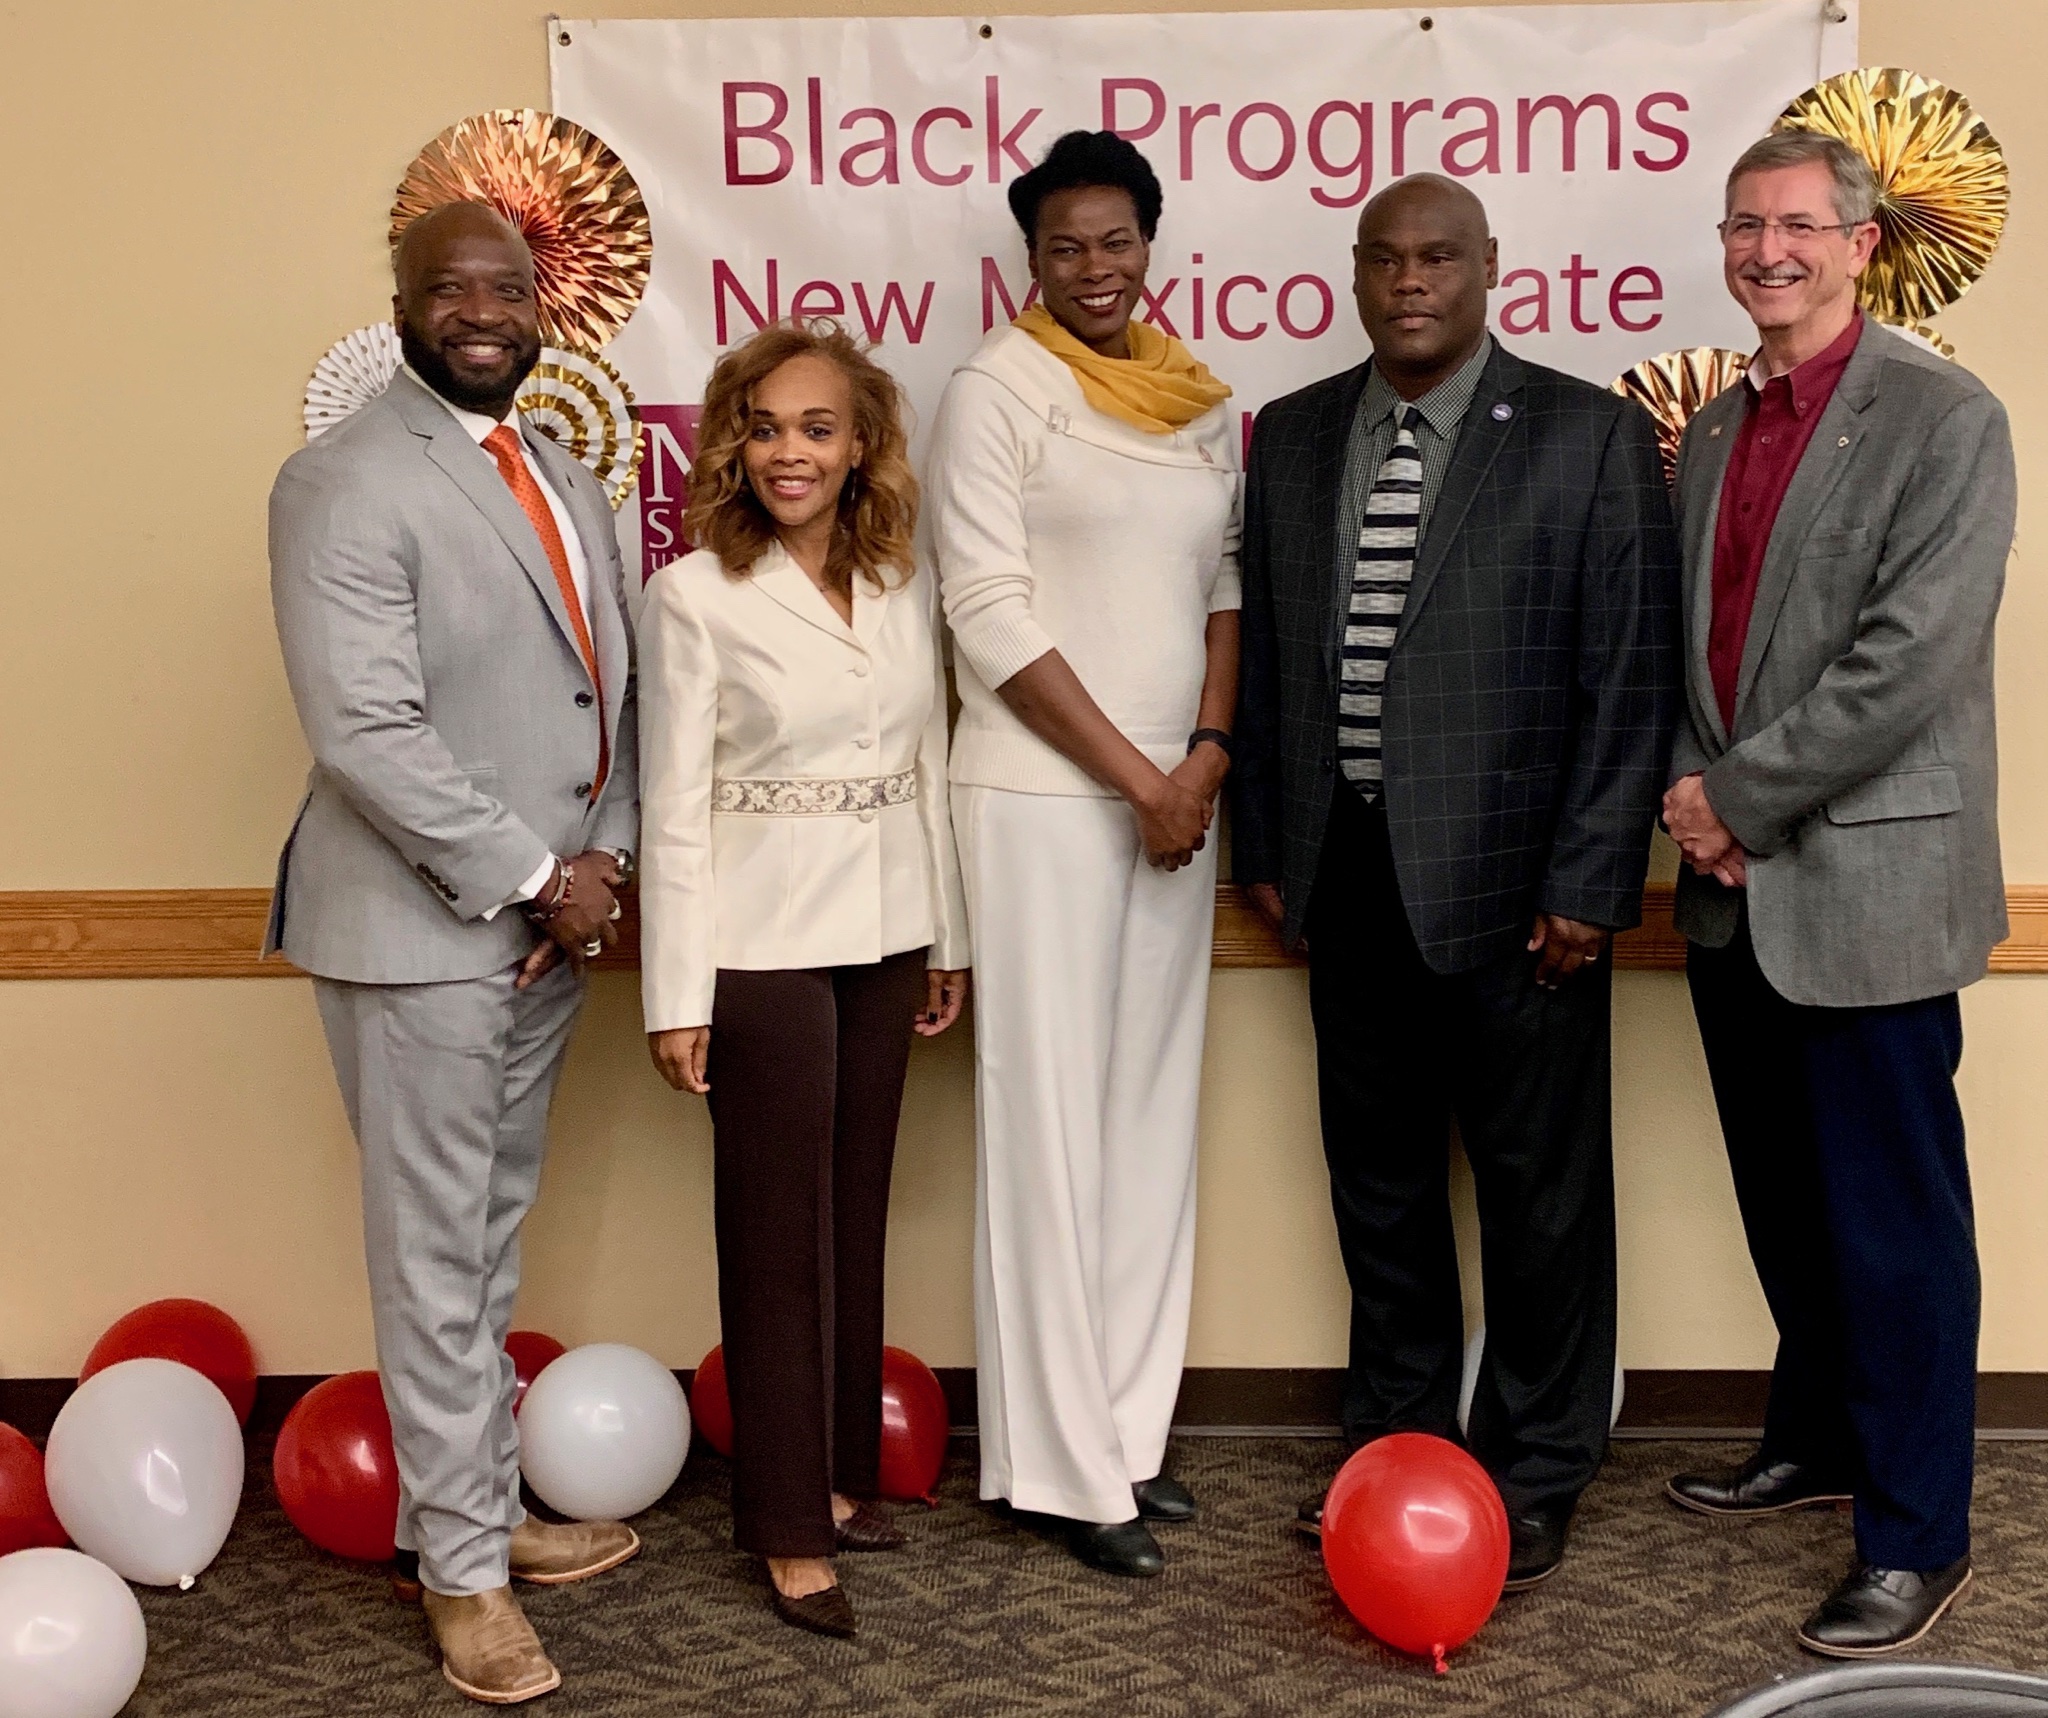 2019-Black-Programs-Graduation-Event--Faculty-and-Staff-Members.jpg